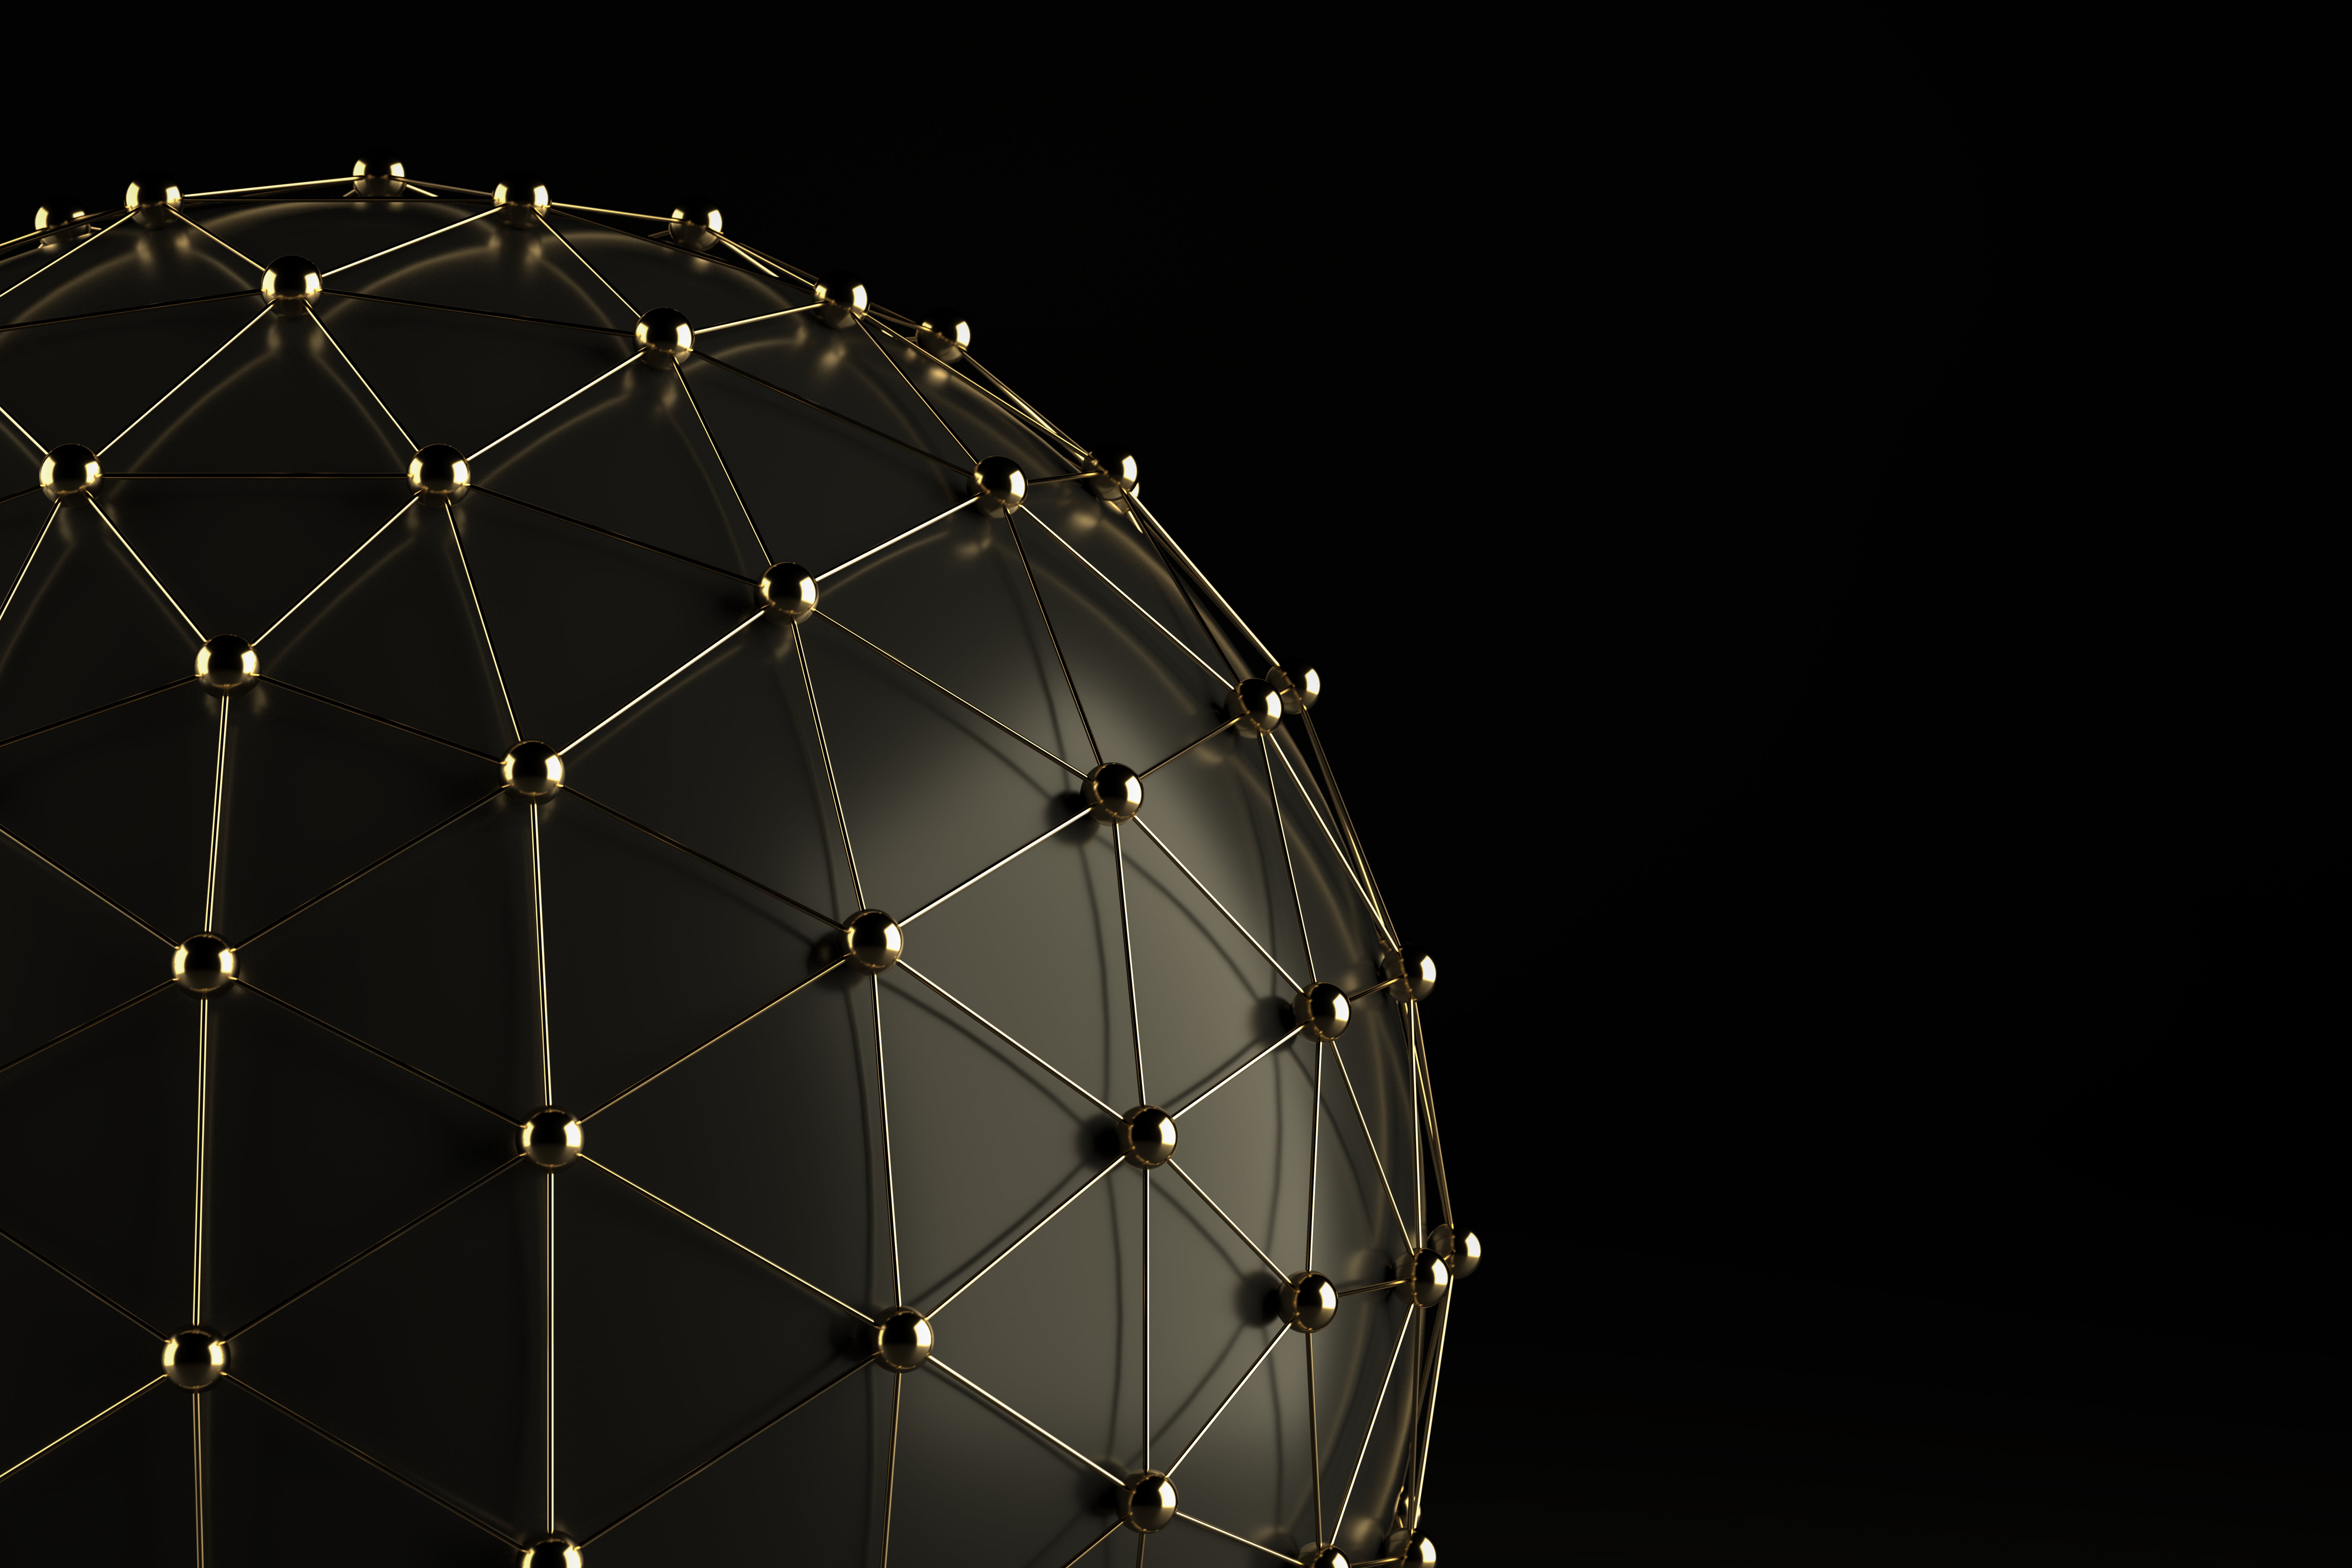 3d rendering of abstract gold spheres connected in a mesh-like triangular pattern and wrapped around black sphere on a black background